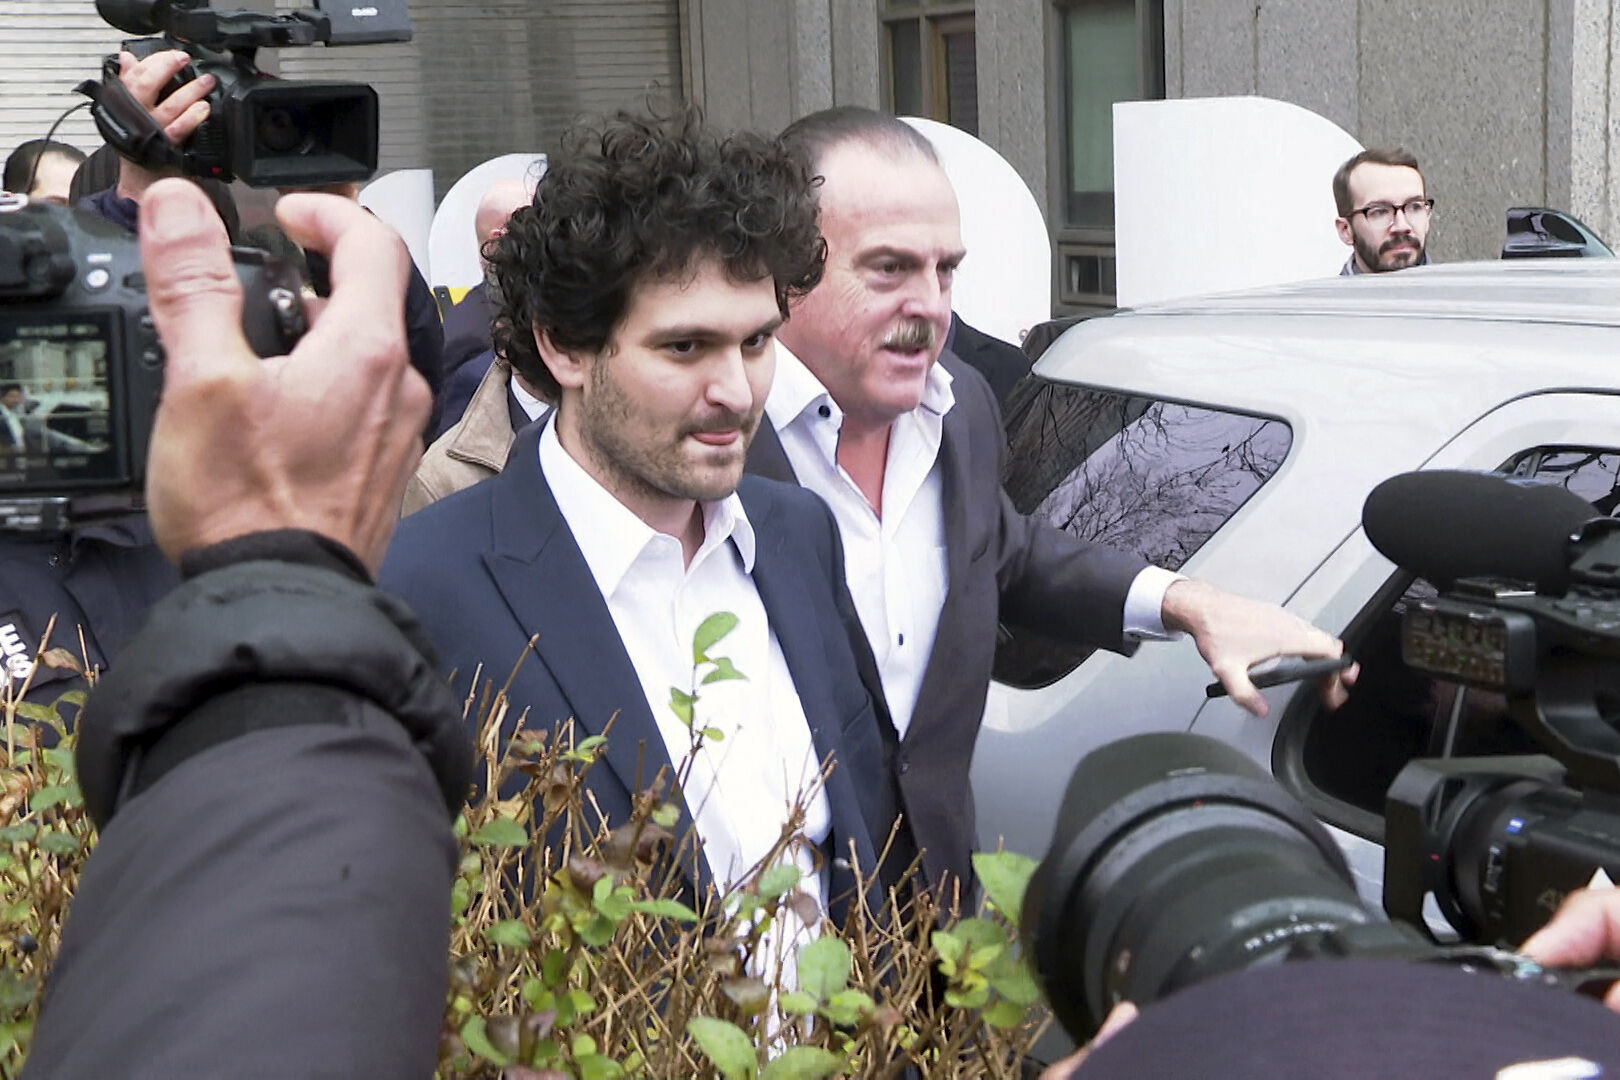 <p>Cryptocurrency entrepreneur Sam Bankman-Fried leaves Manhattan federal court on bail ,Thursday, Dec. 22, 2022 in New York. Bankman-Fried is accused of swindling investors and looting customer deposits on his FTX trading platform. (AP Photo/Ted Shaffrey)</p>   PHOTO CREDIT: Ted Shaffrey - staff, AP